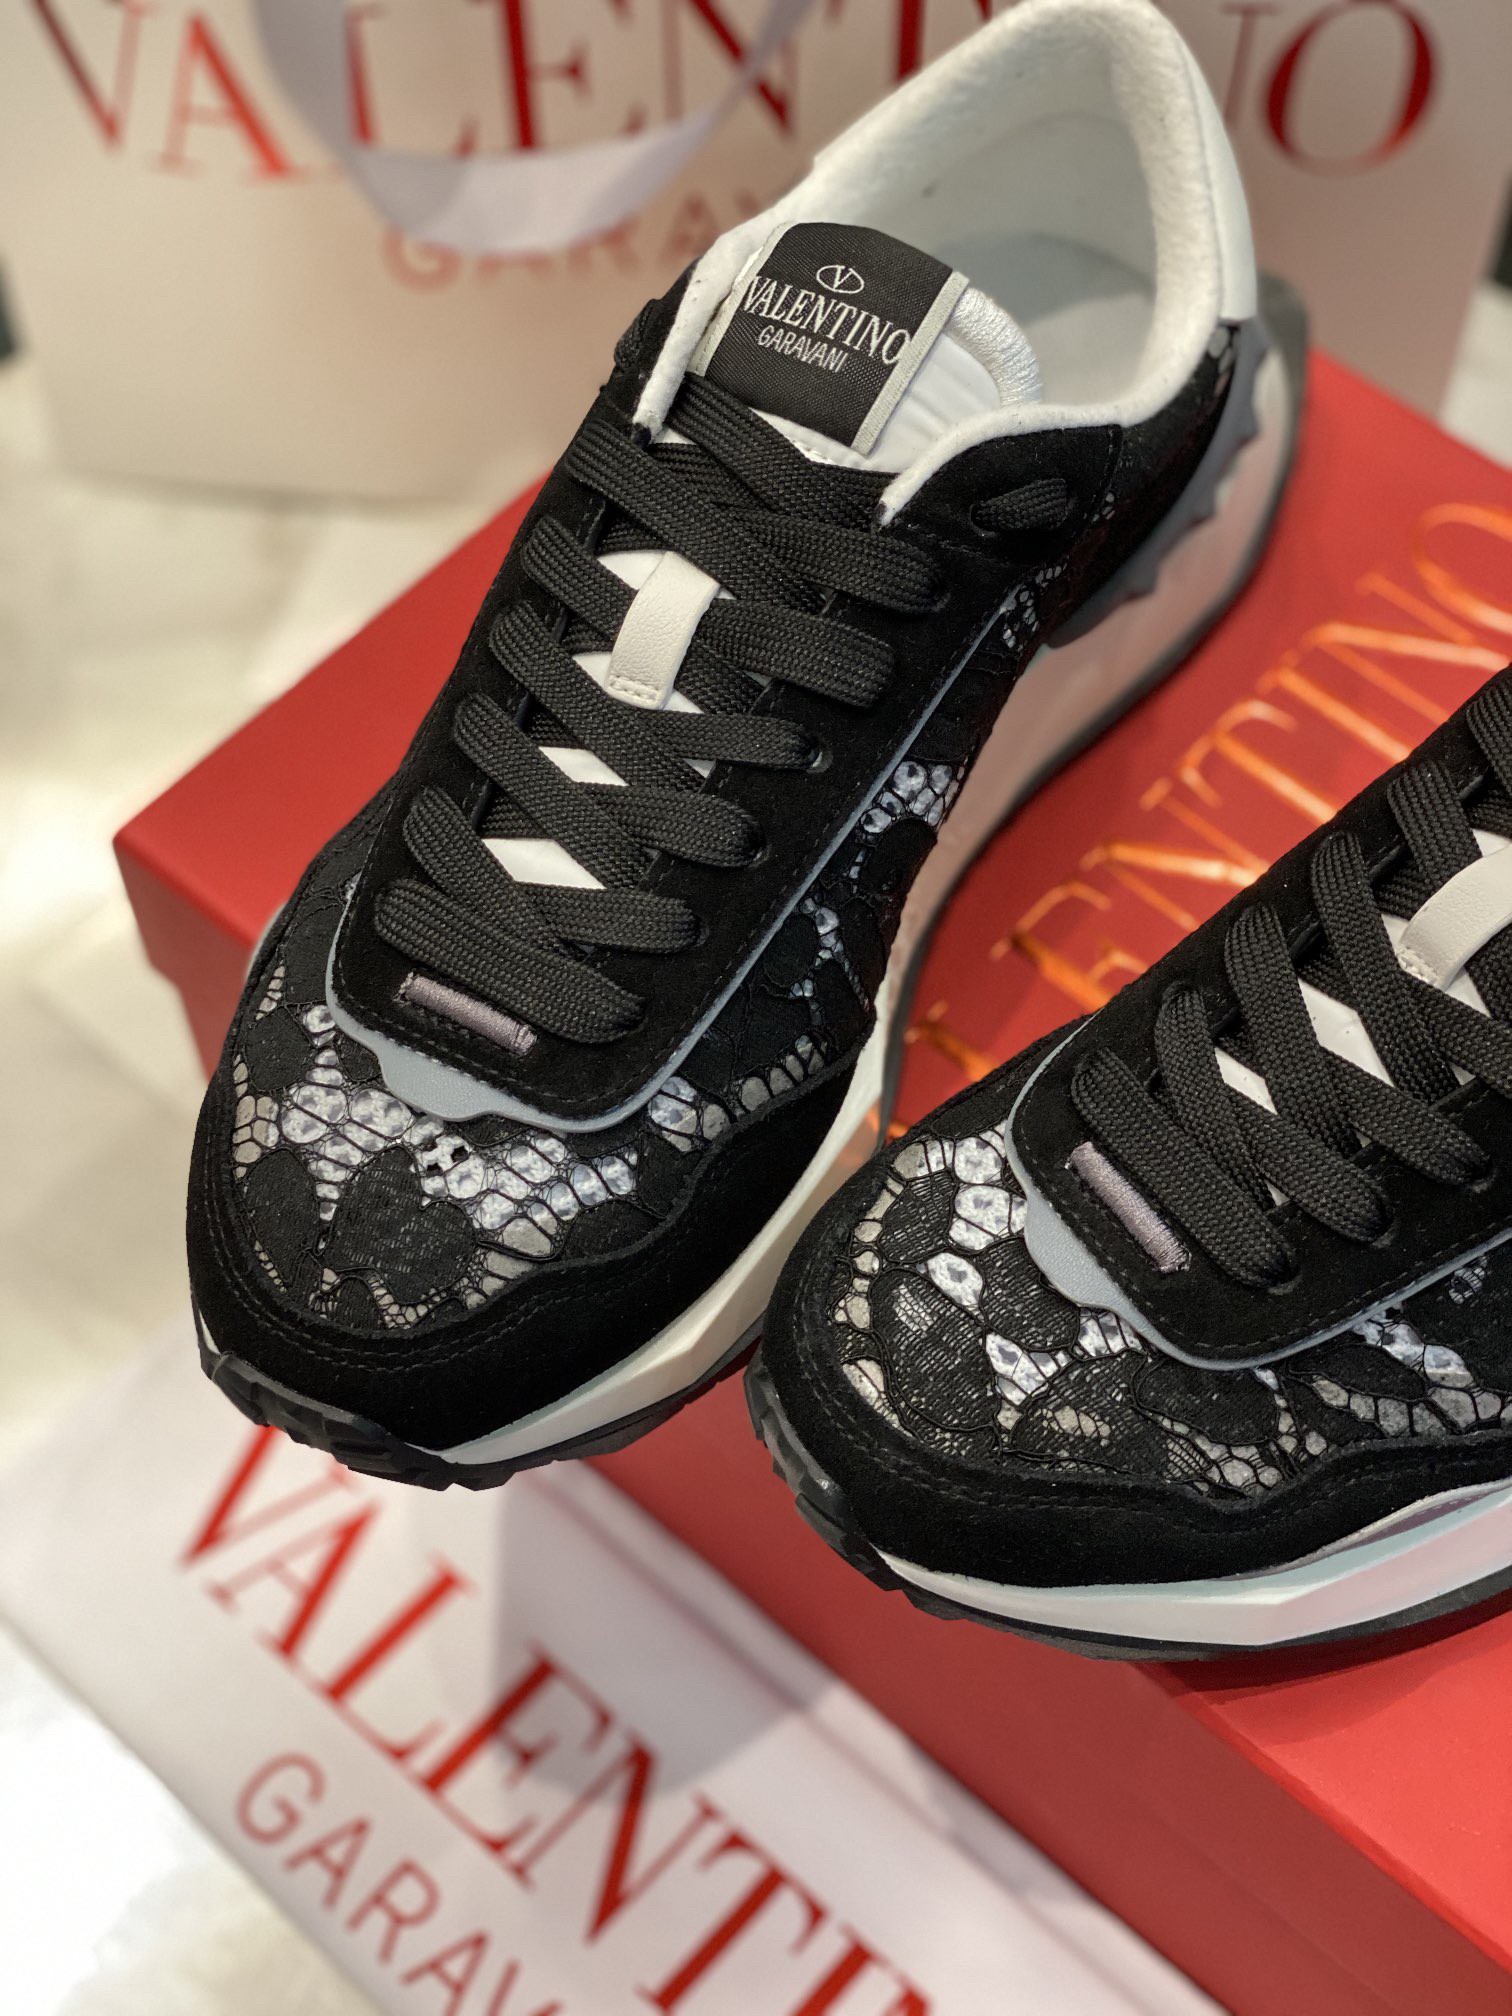 Replica Valentino Women's Lacerunner Sneakers in Black Lace and Mesh